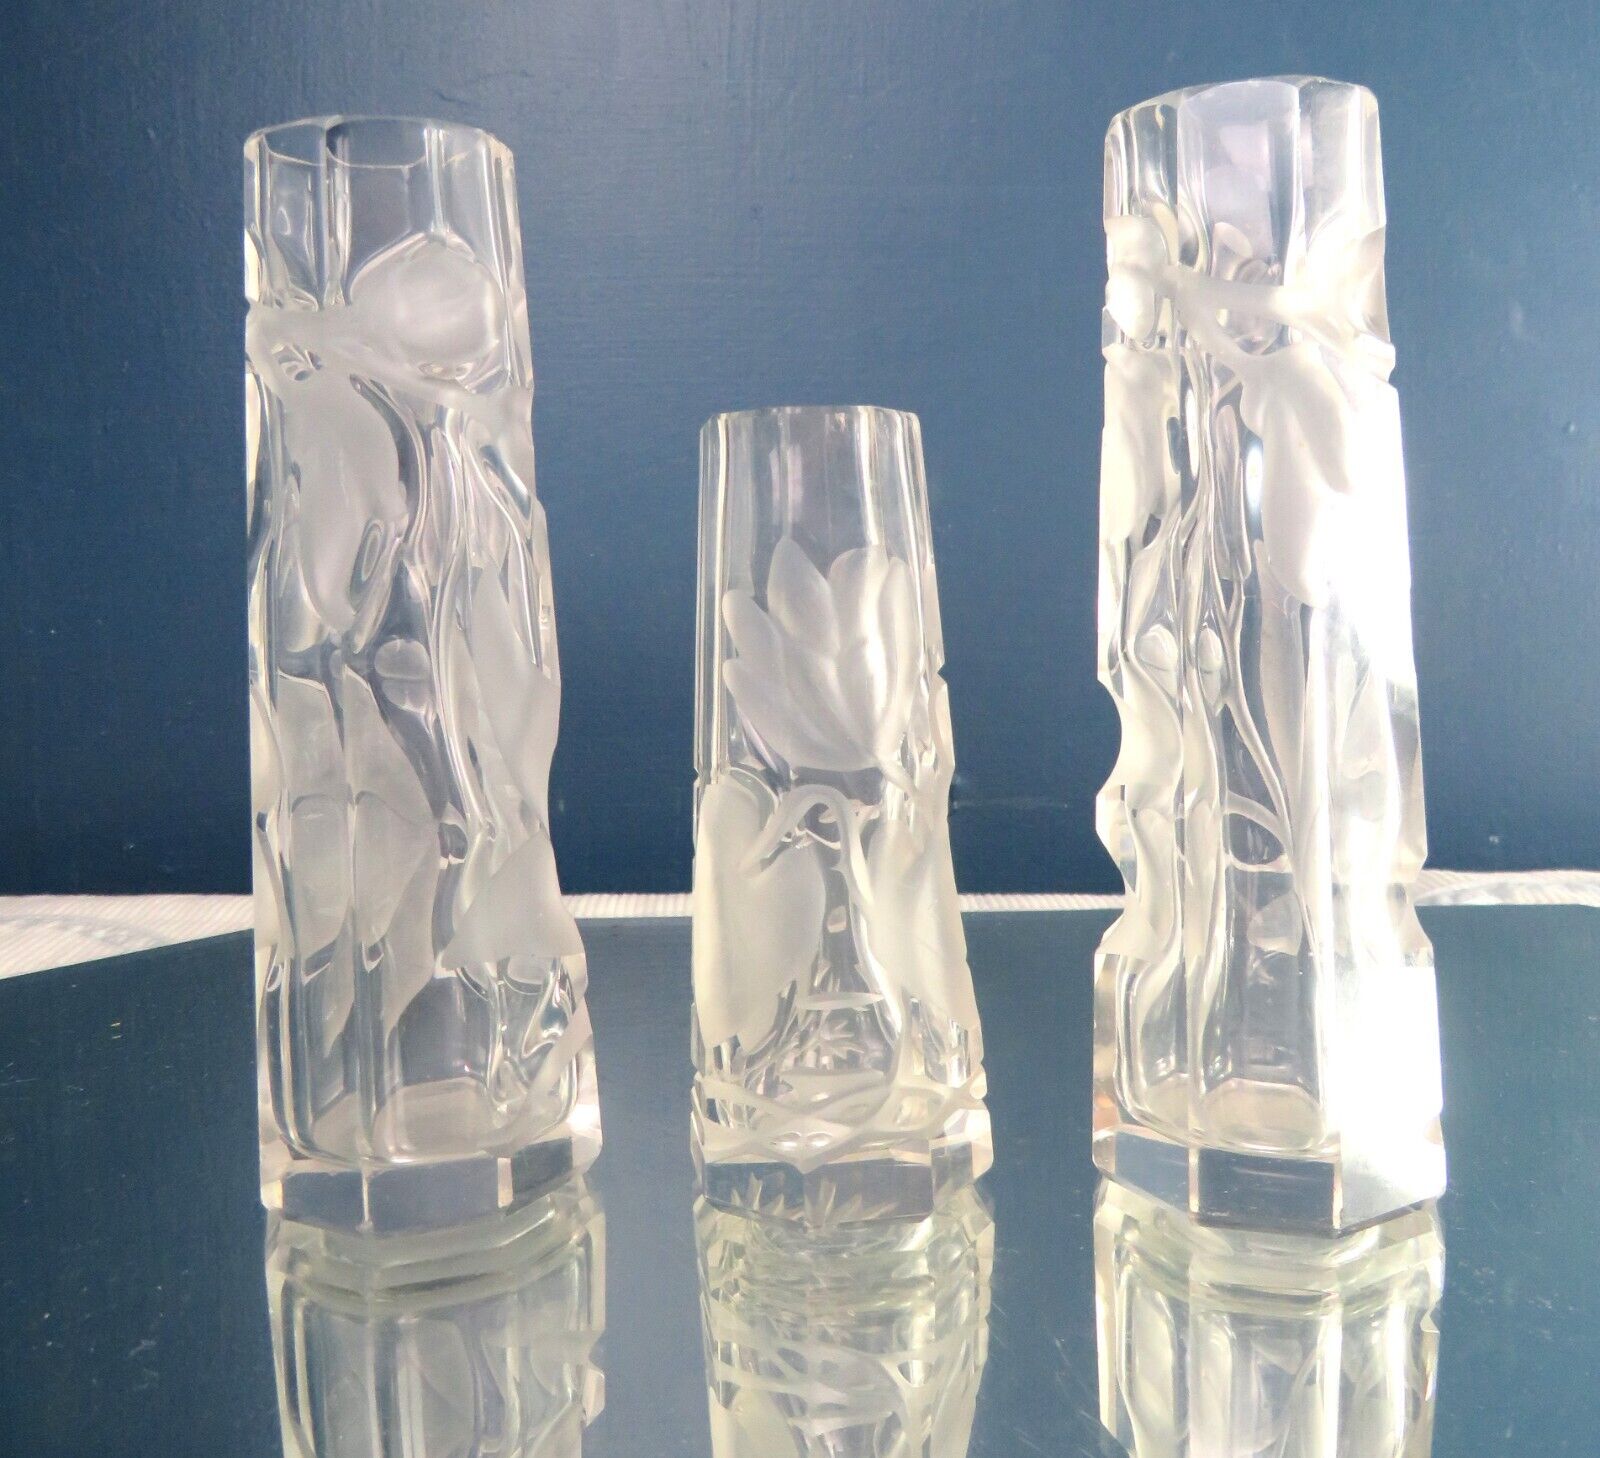 3 VERY RARE ART NOUVEAU INTAGLIO CUT GLASS VASES ~MOSER-FREE SHIPPING